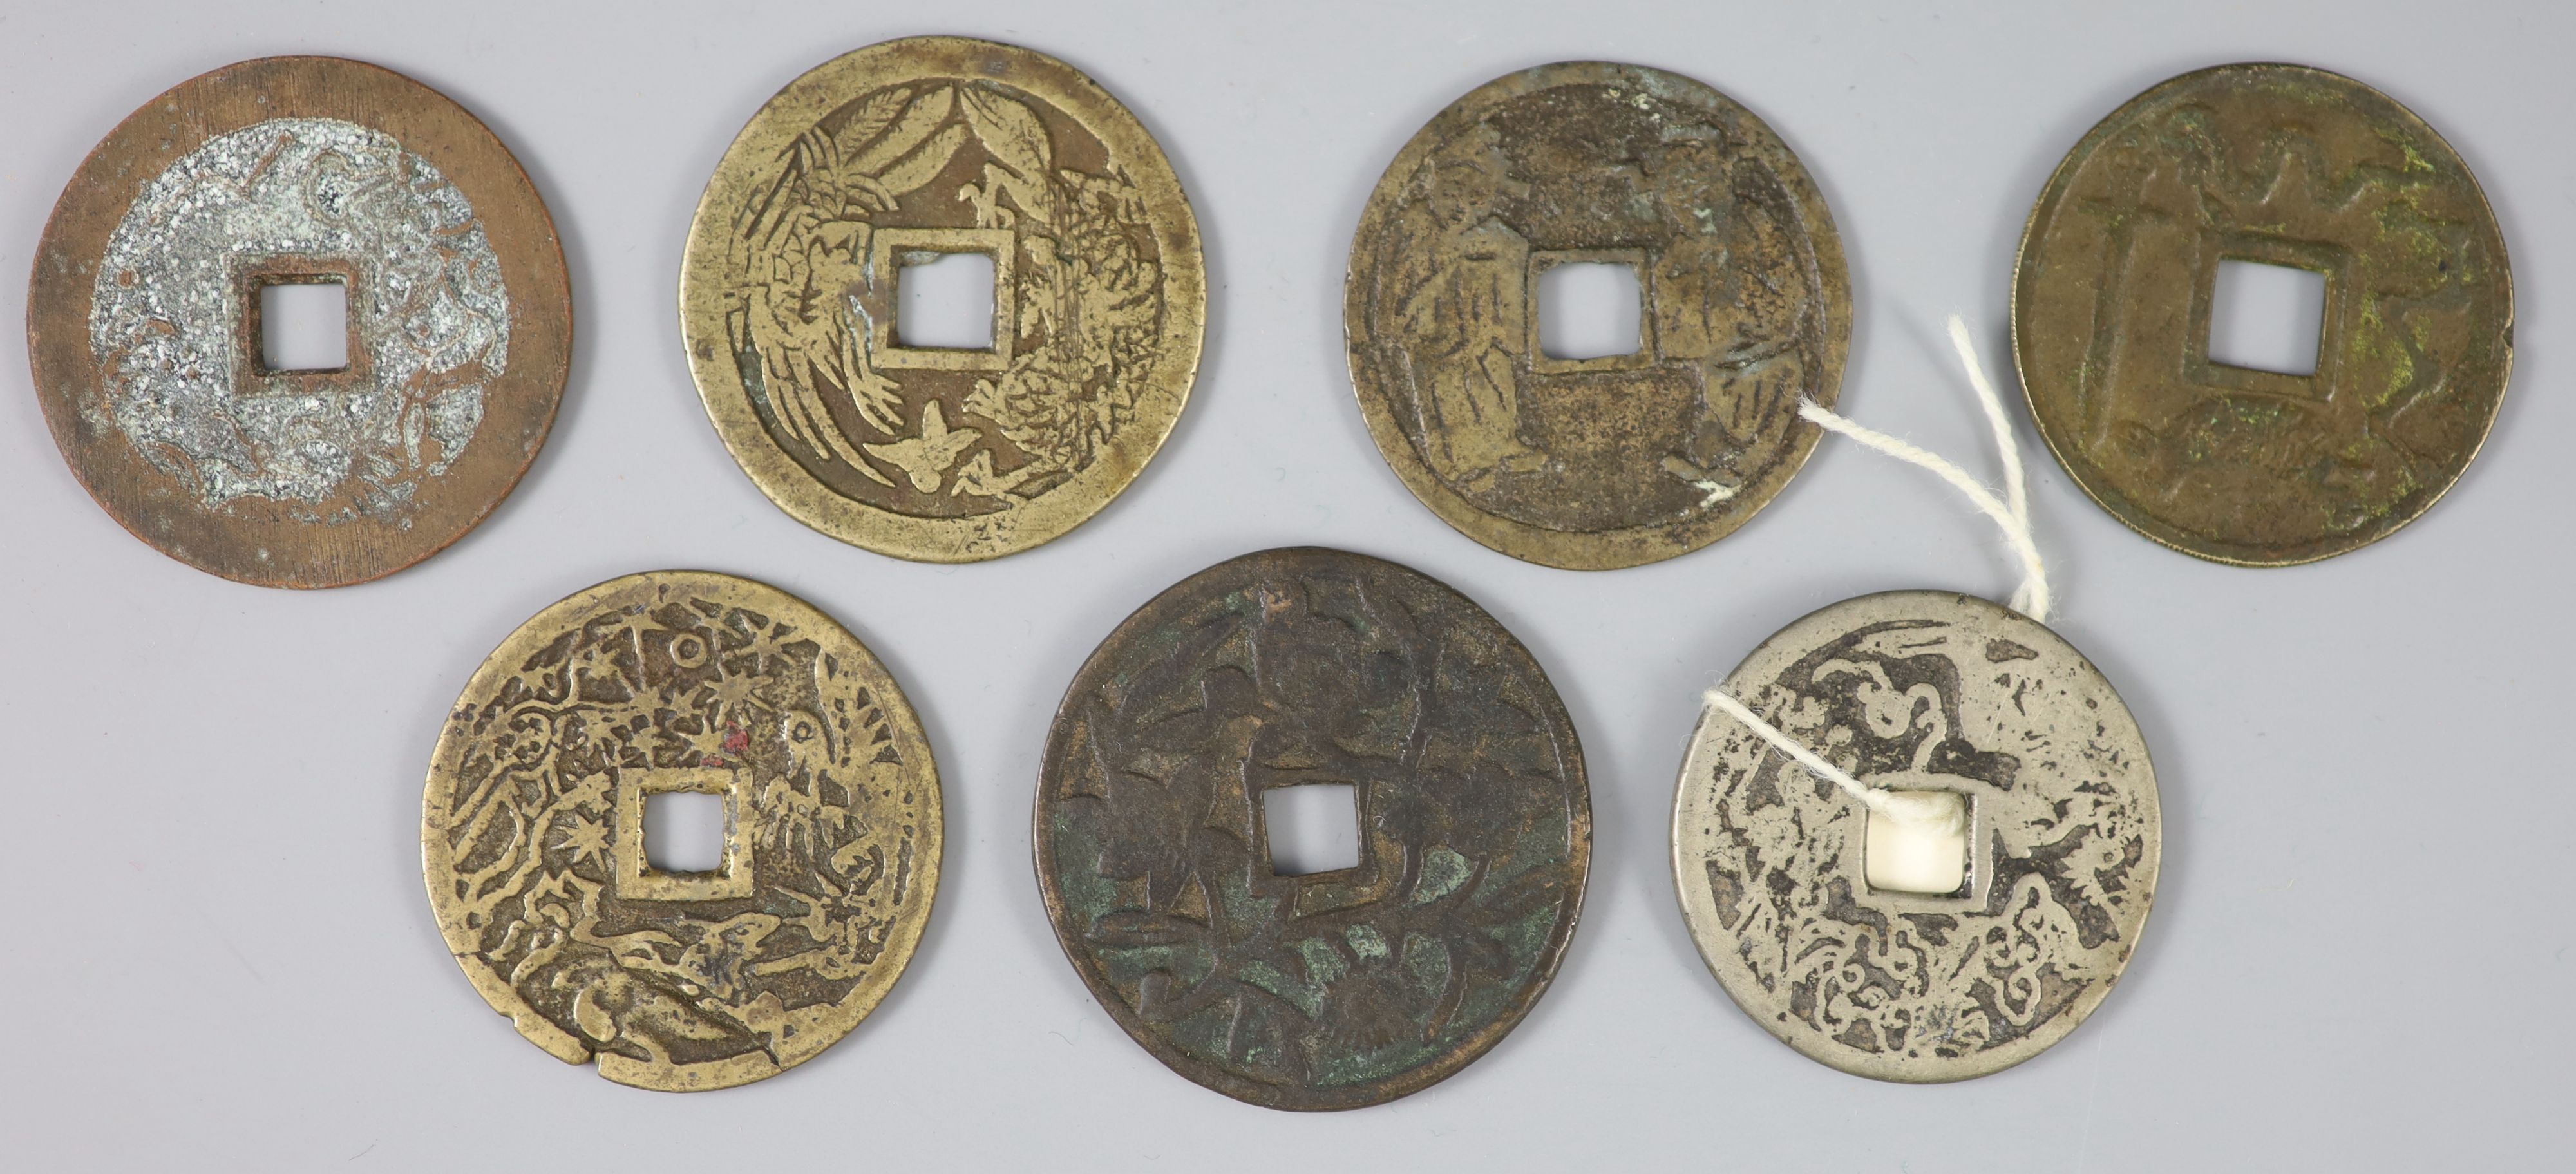 China, a group of 7 bronze charms or amulets, Qing dynasty,